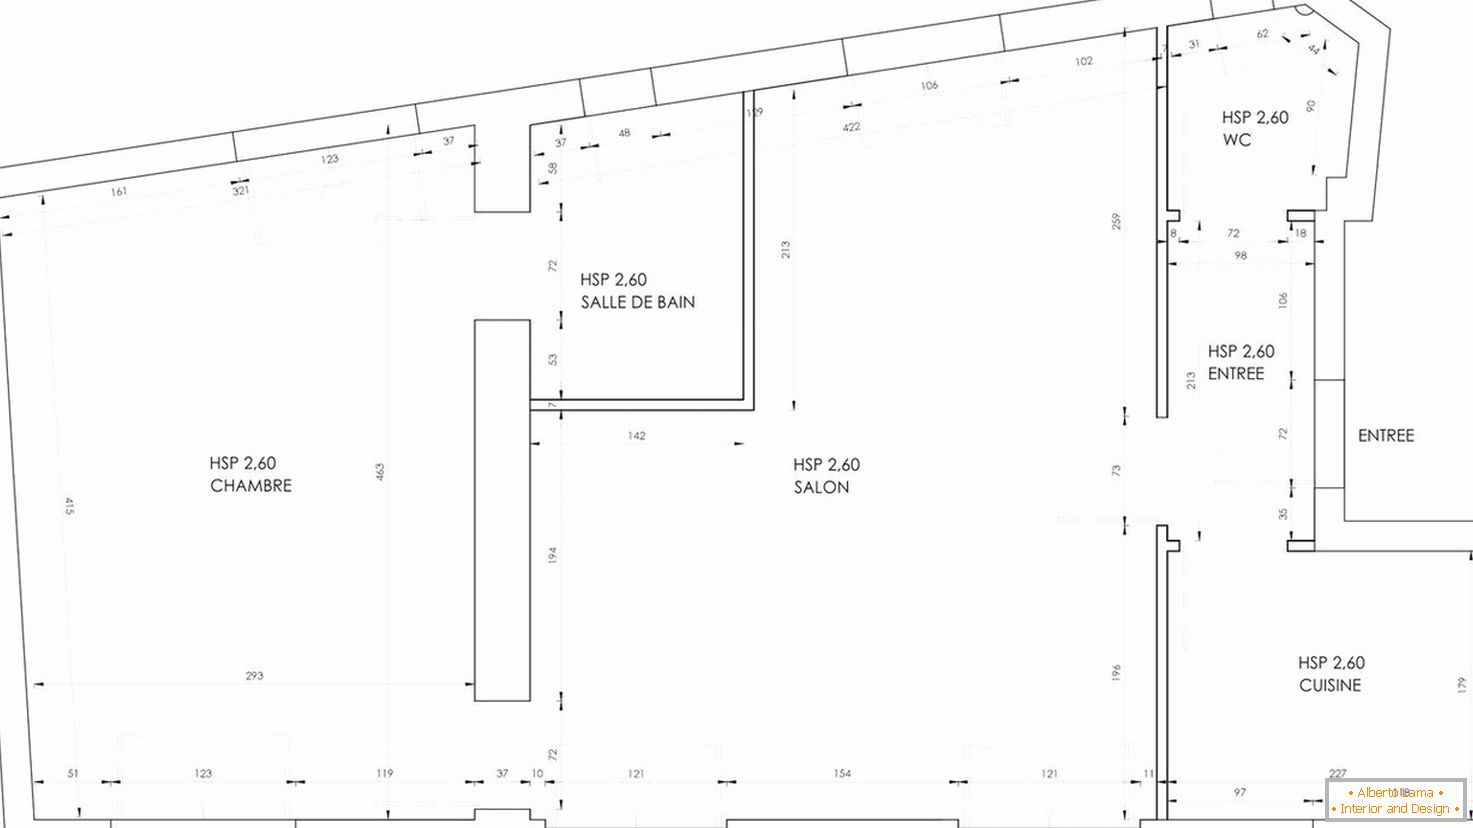 The layout of a small apartment before renovation